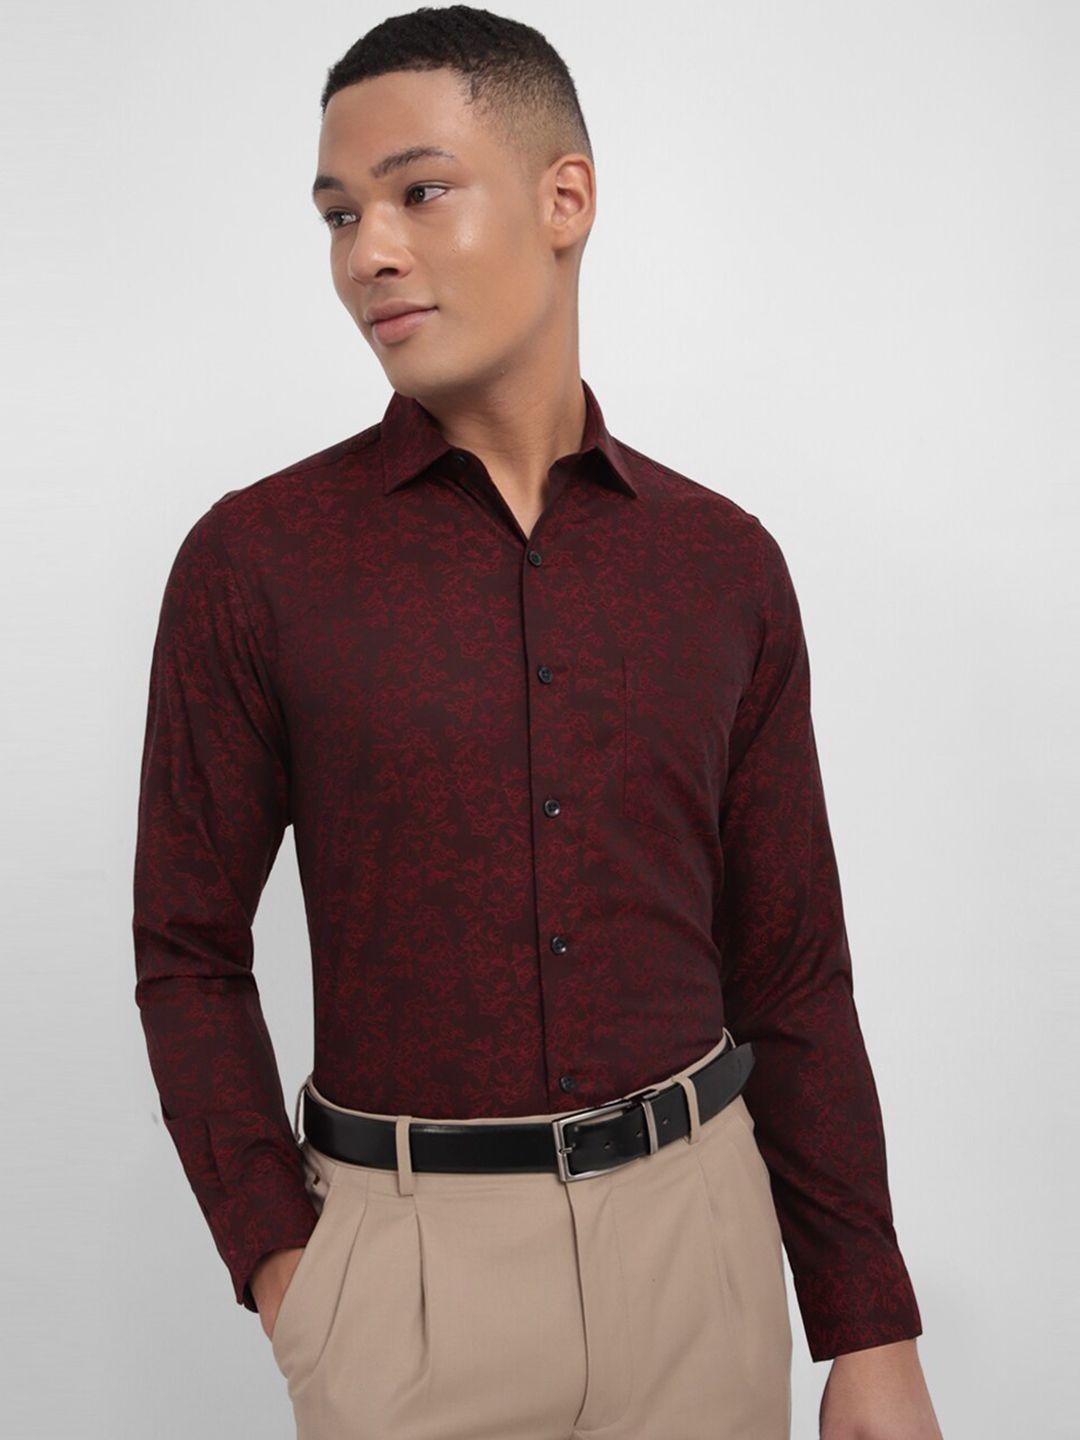 allen solly slim fit floral printed spread collar pure cotton formal shirt